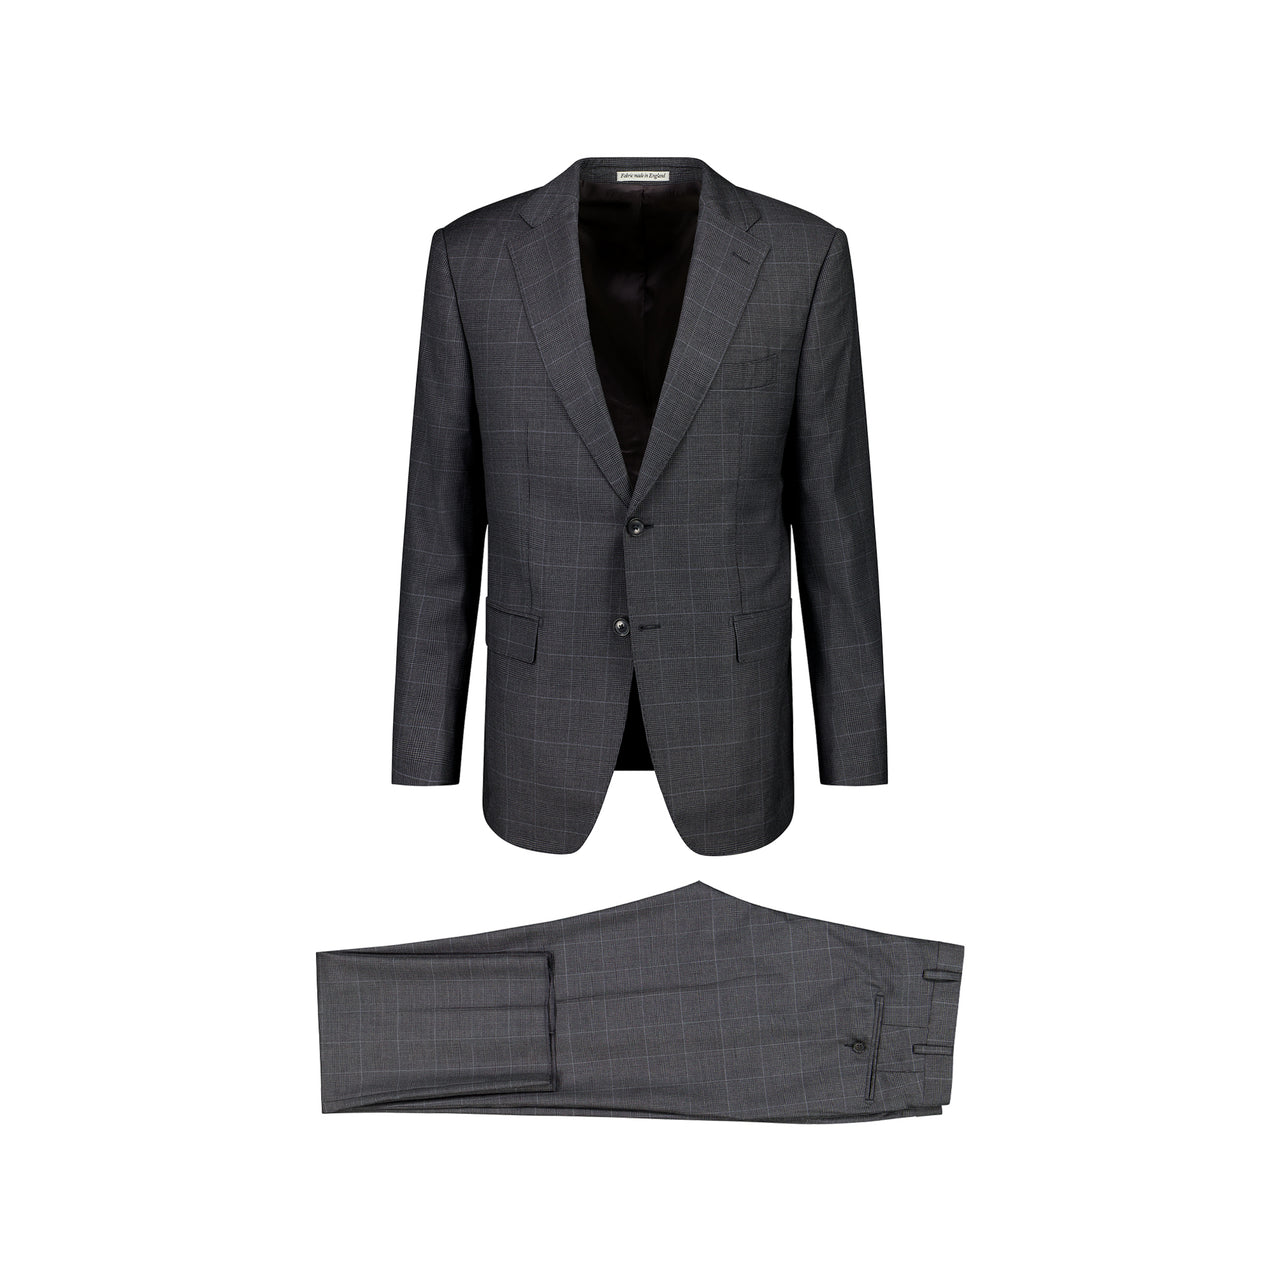 HENRY SARTORIAL DORMEUIL SUIT - FC PRINCE OF WALES REG